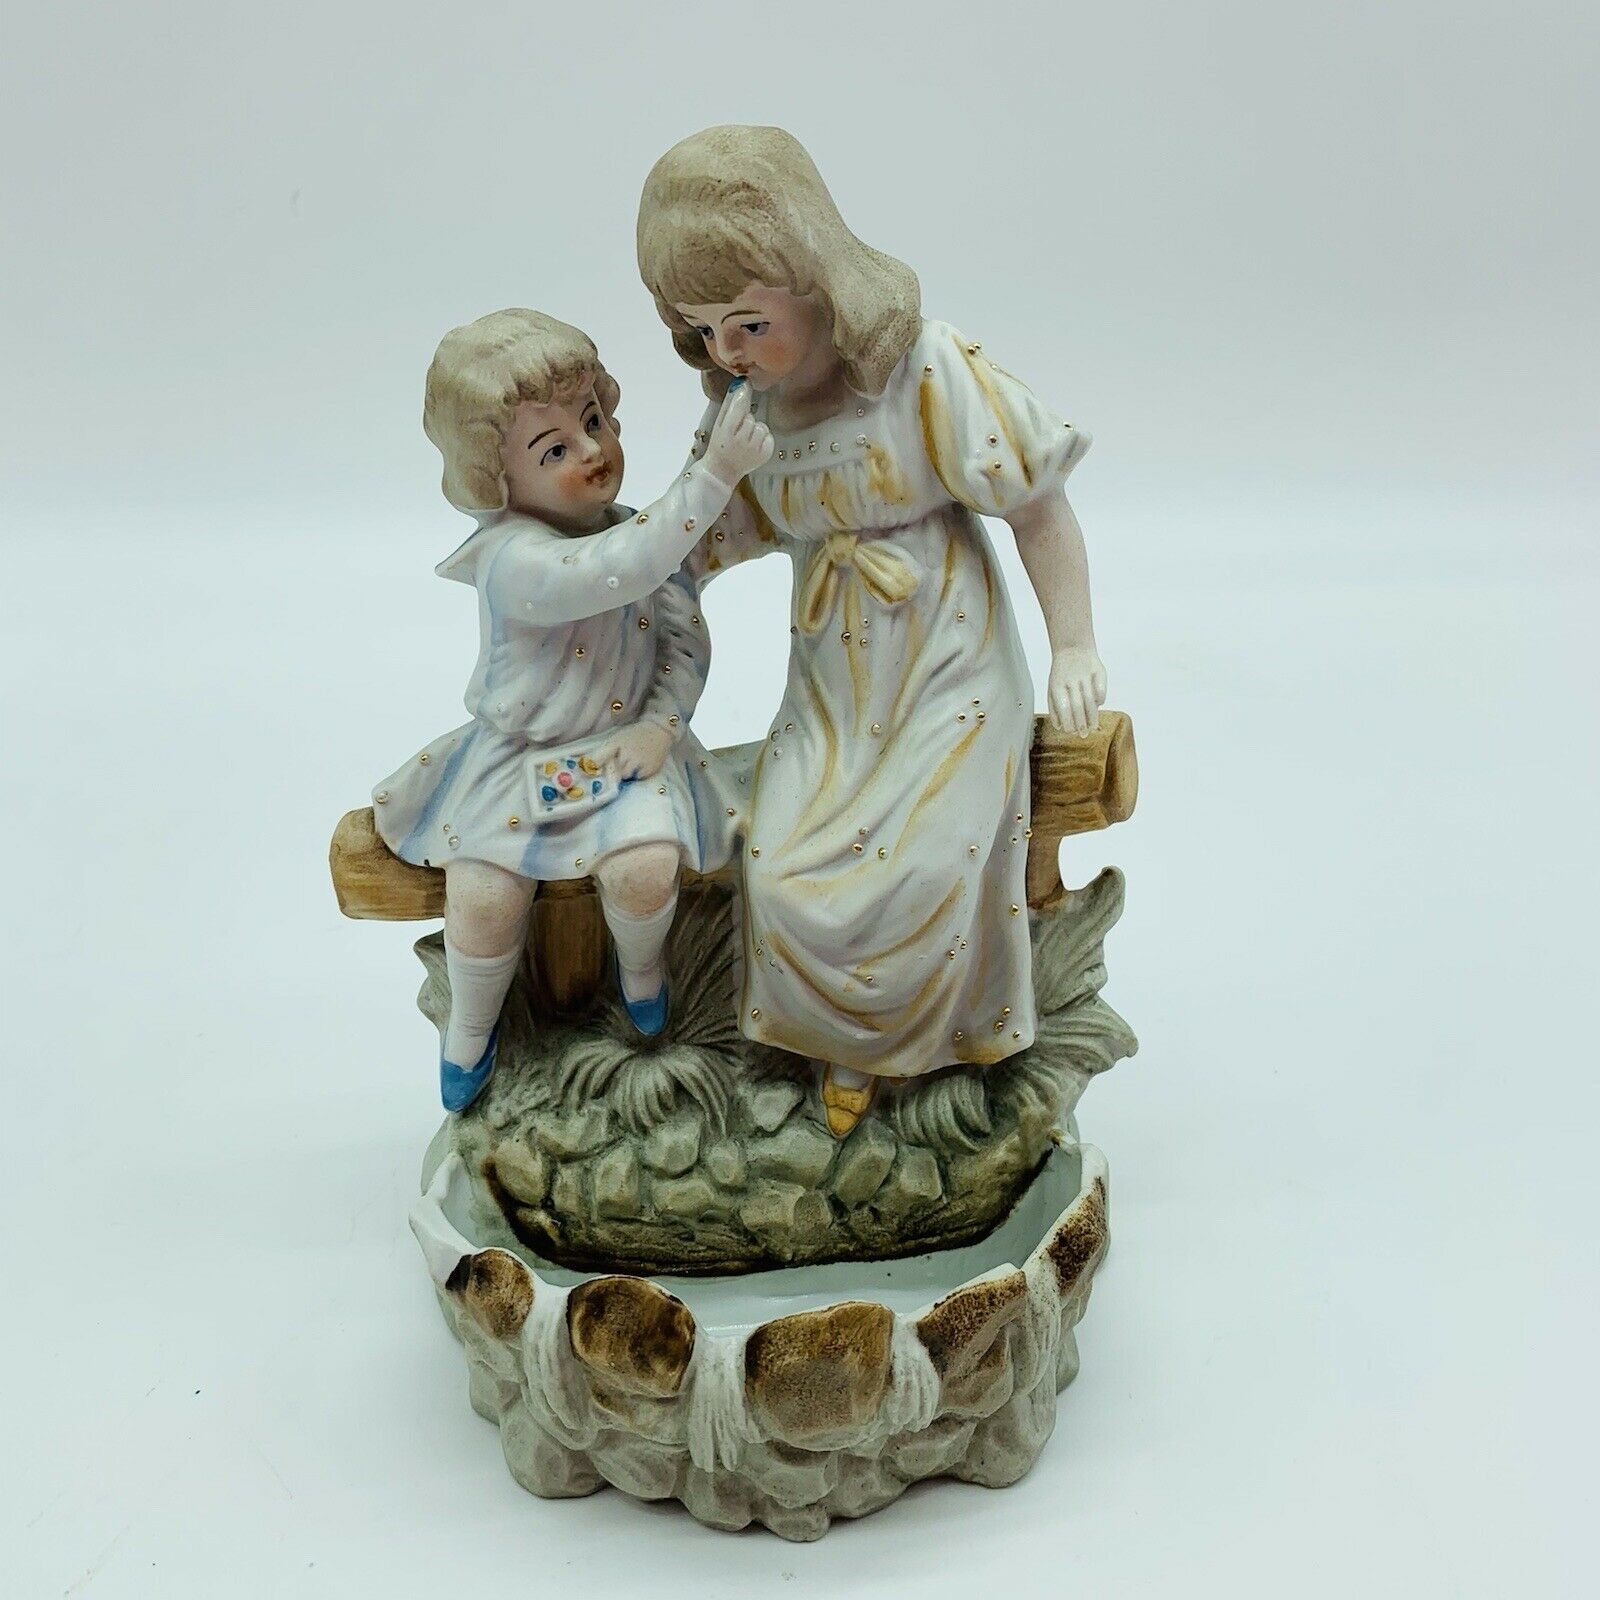 Children Eating Candy At The Well Ceramic/bisque/porcelain 7”